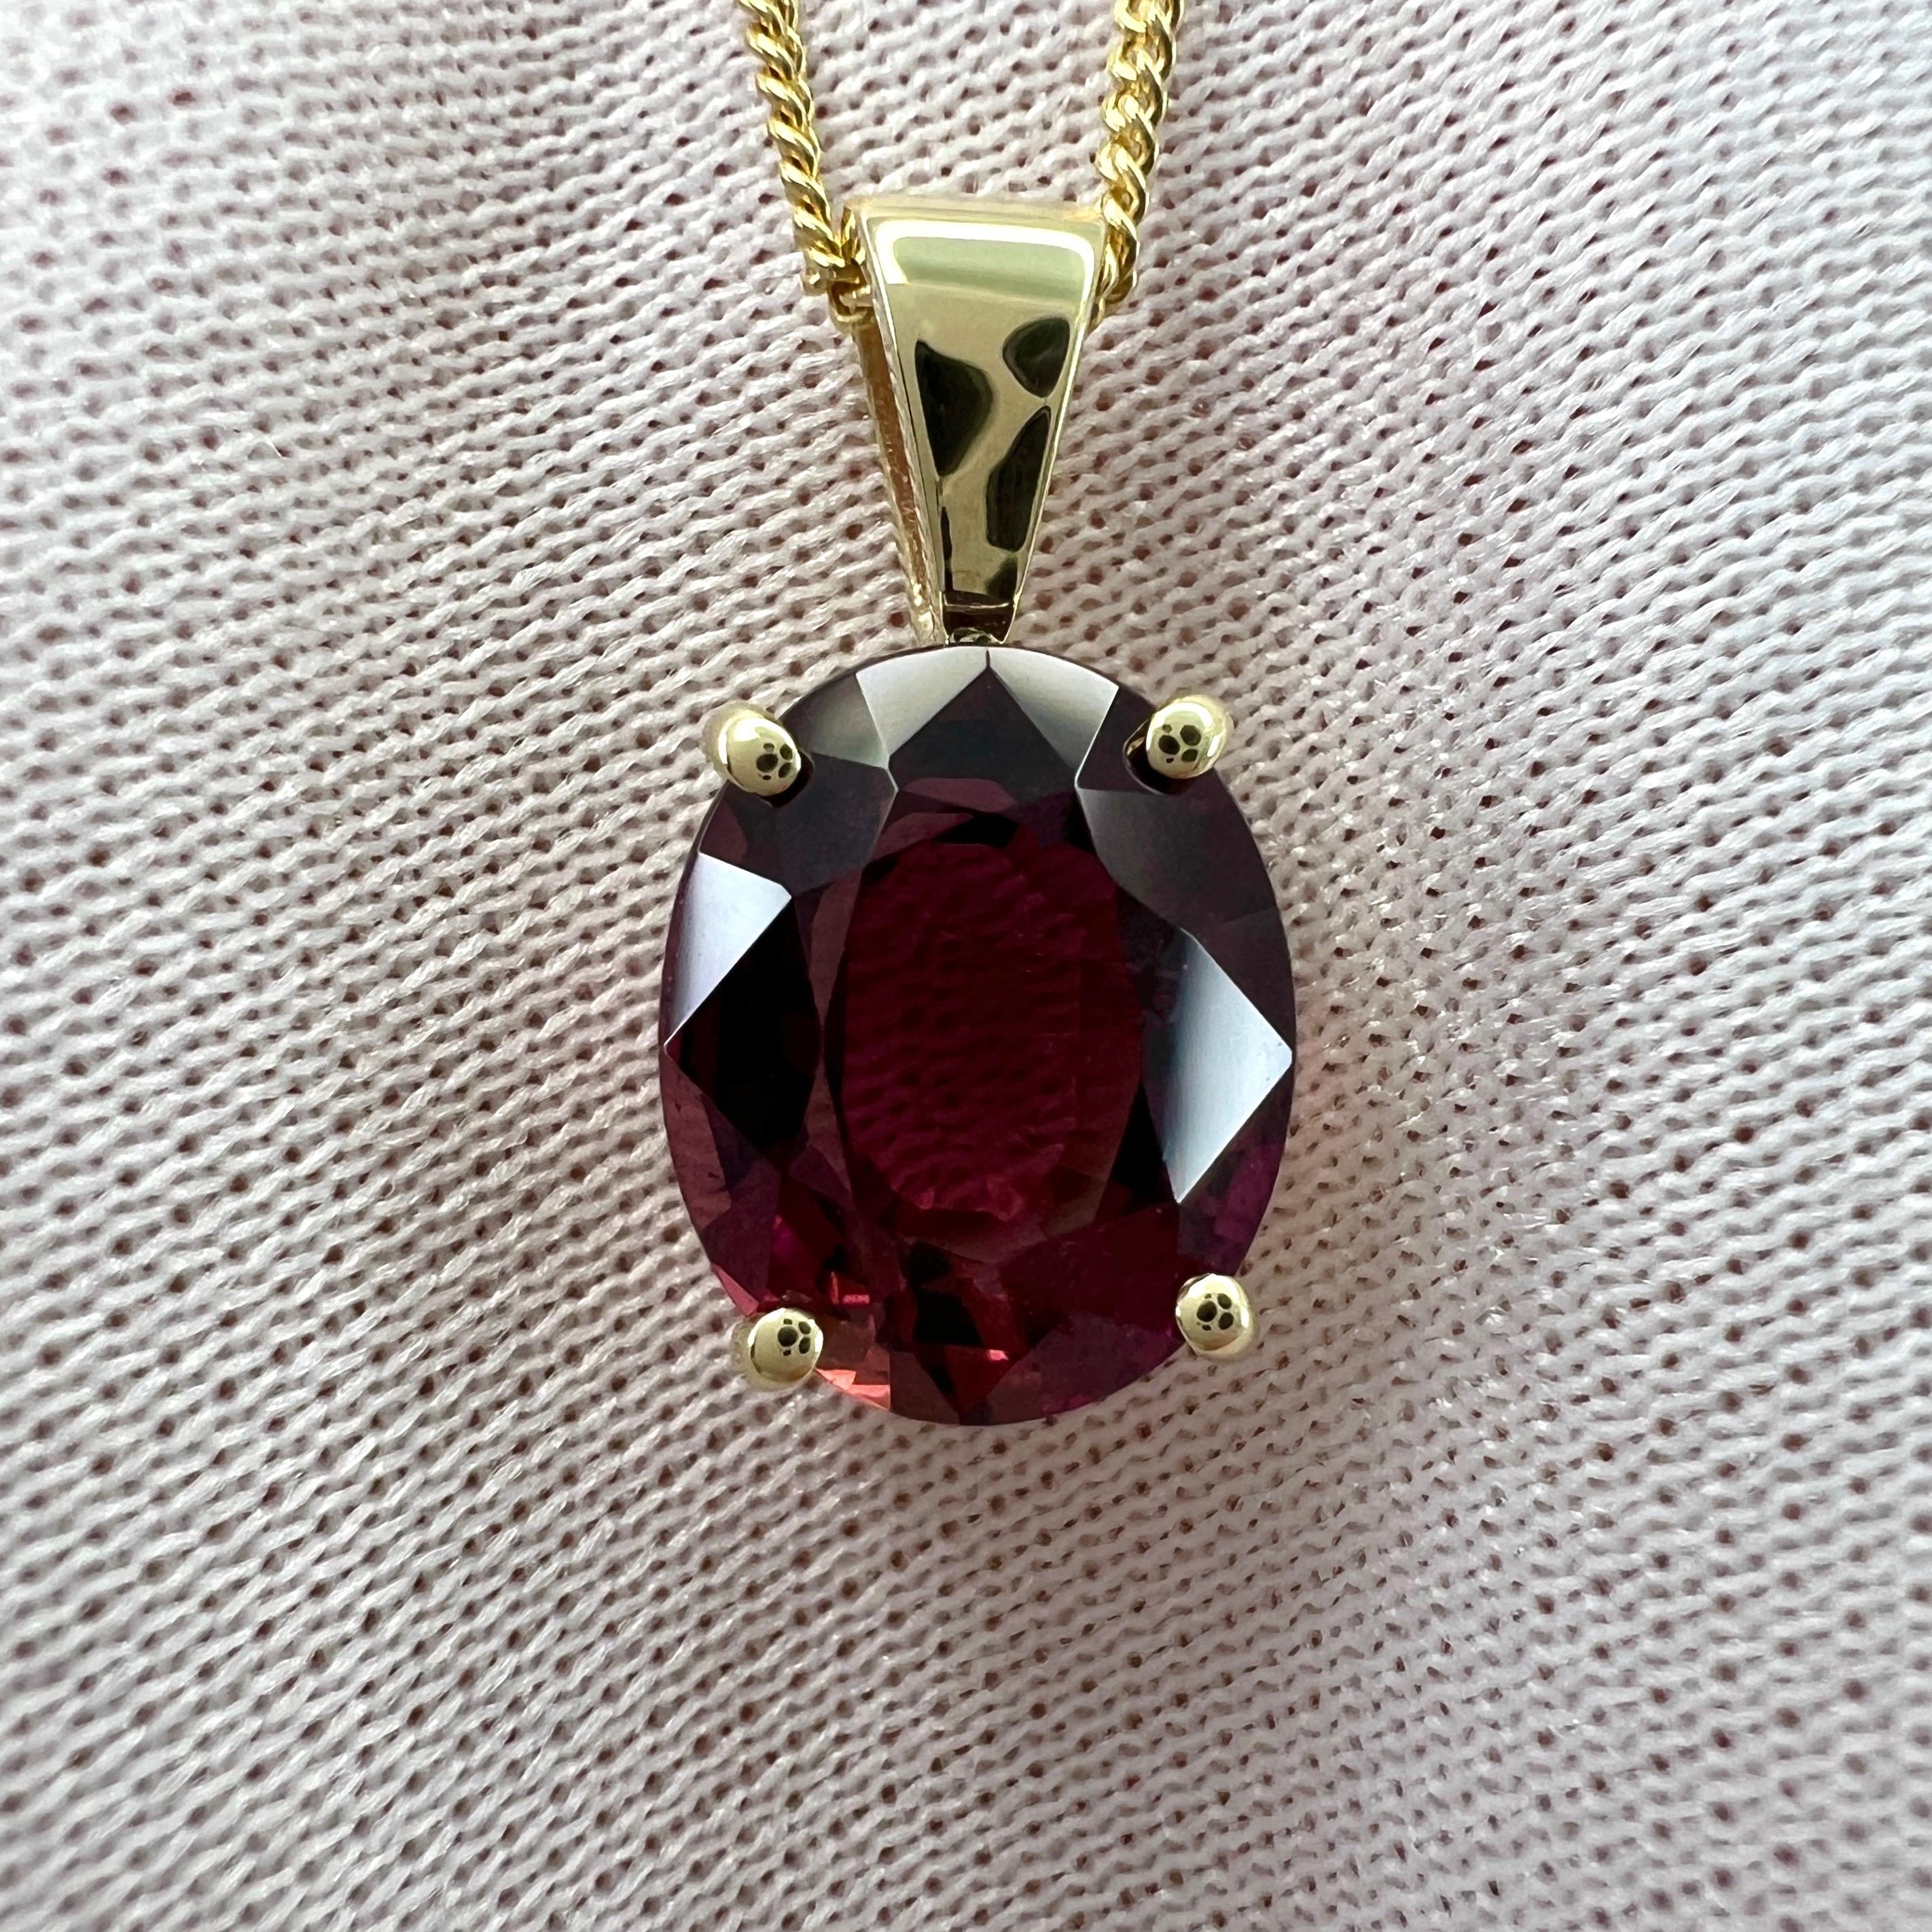 2.66ct Rubellite Tourmaline Pink Oval Cut 9k Yellow Gold Pendant Necklace For Sale 3